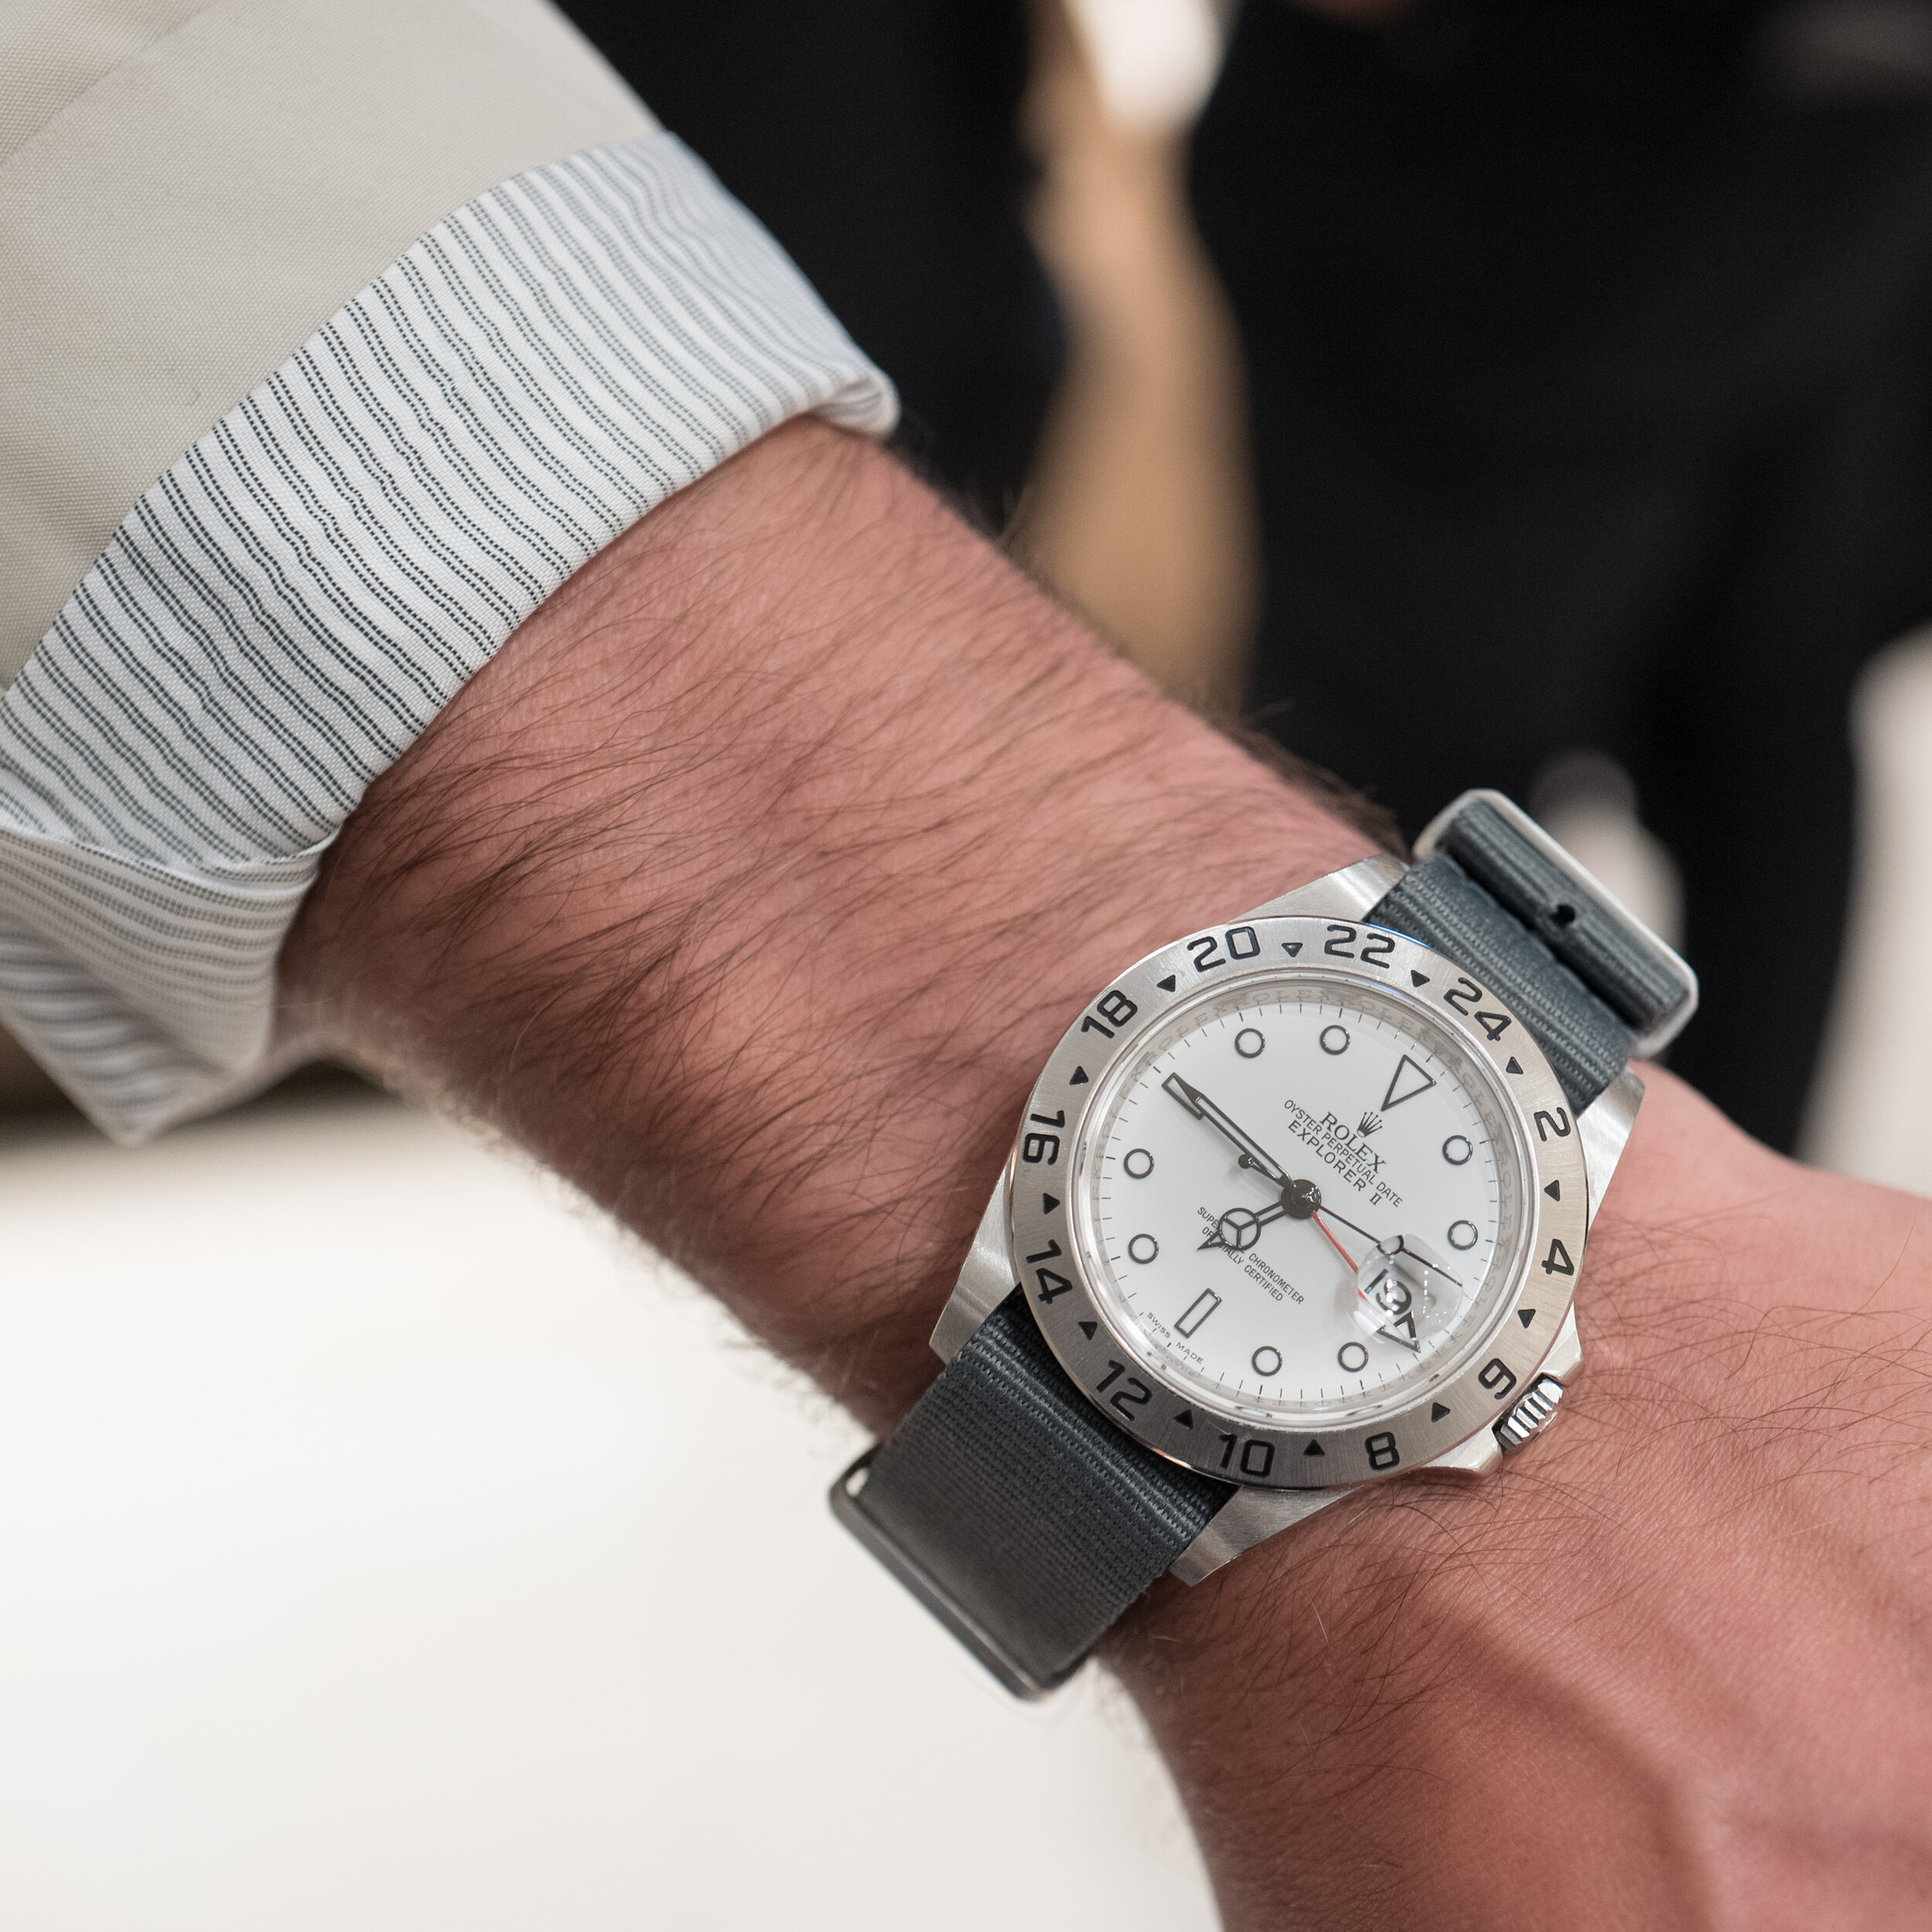 Thoughts on my Rolex Explorer II “Polar” 216570 — WatchMax